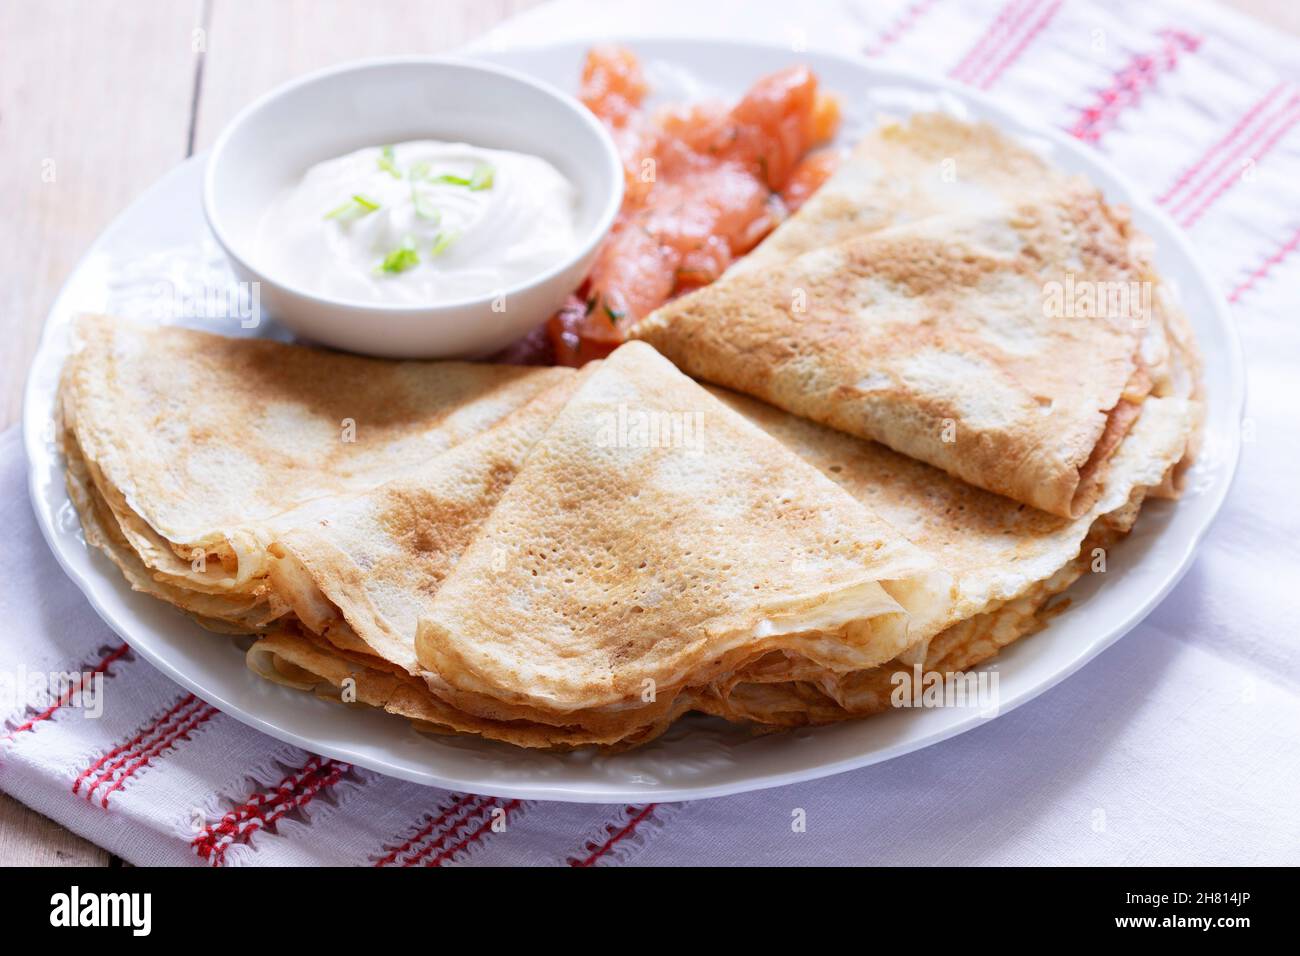 Thin pancakes with salmon and sour cream on a light background. Rustic style. Stock Photo